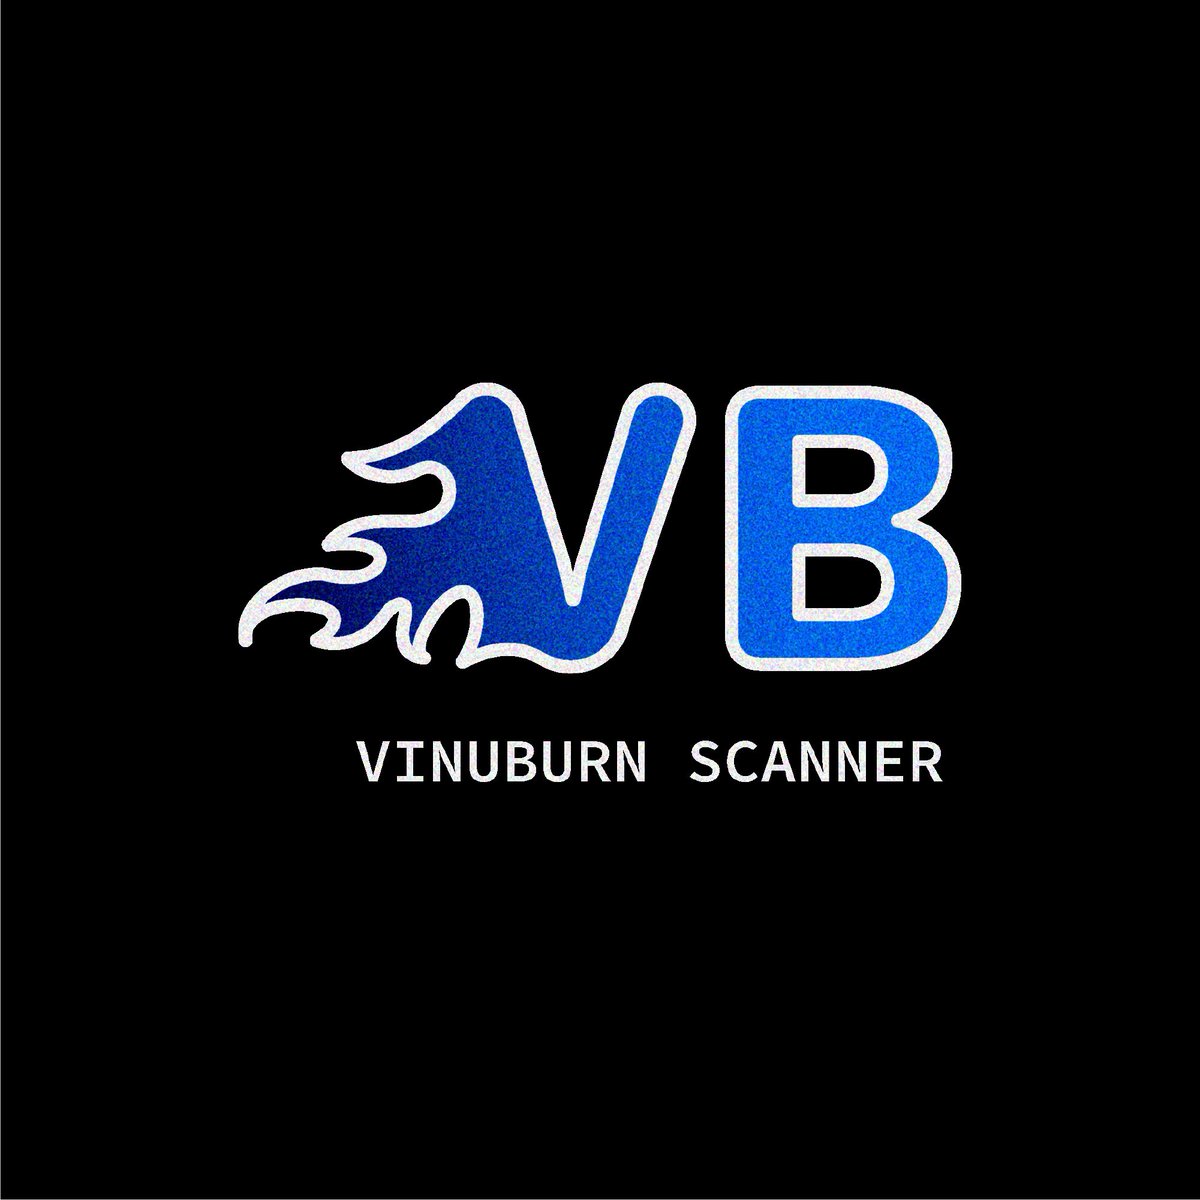 🔥 New logo for #VinuBurn with a design as fun as ever.

The $VINU spirit is here to stay !
Fast, feeless and deflationary.

#burn #crypto #bullrun #BULLISH #x1000GEM #Bitcoin